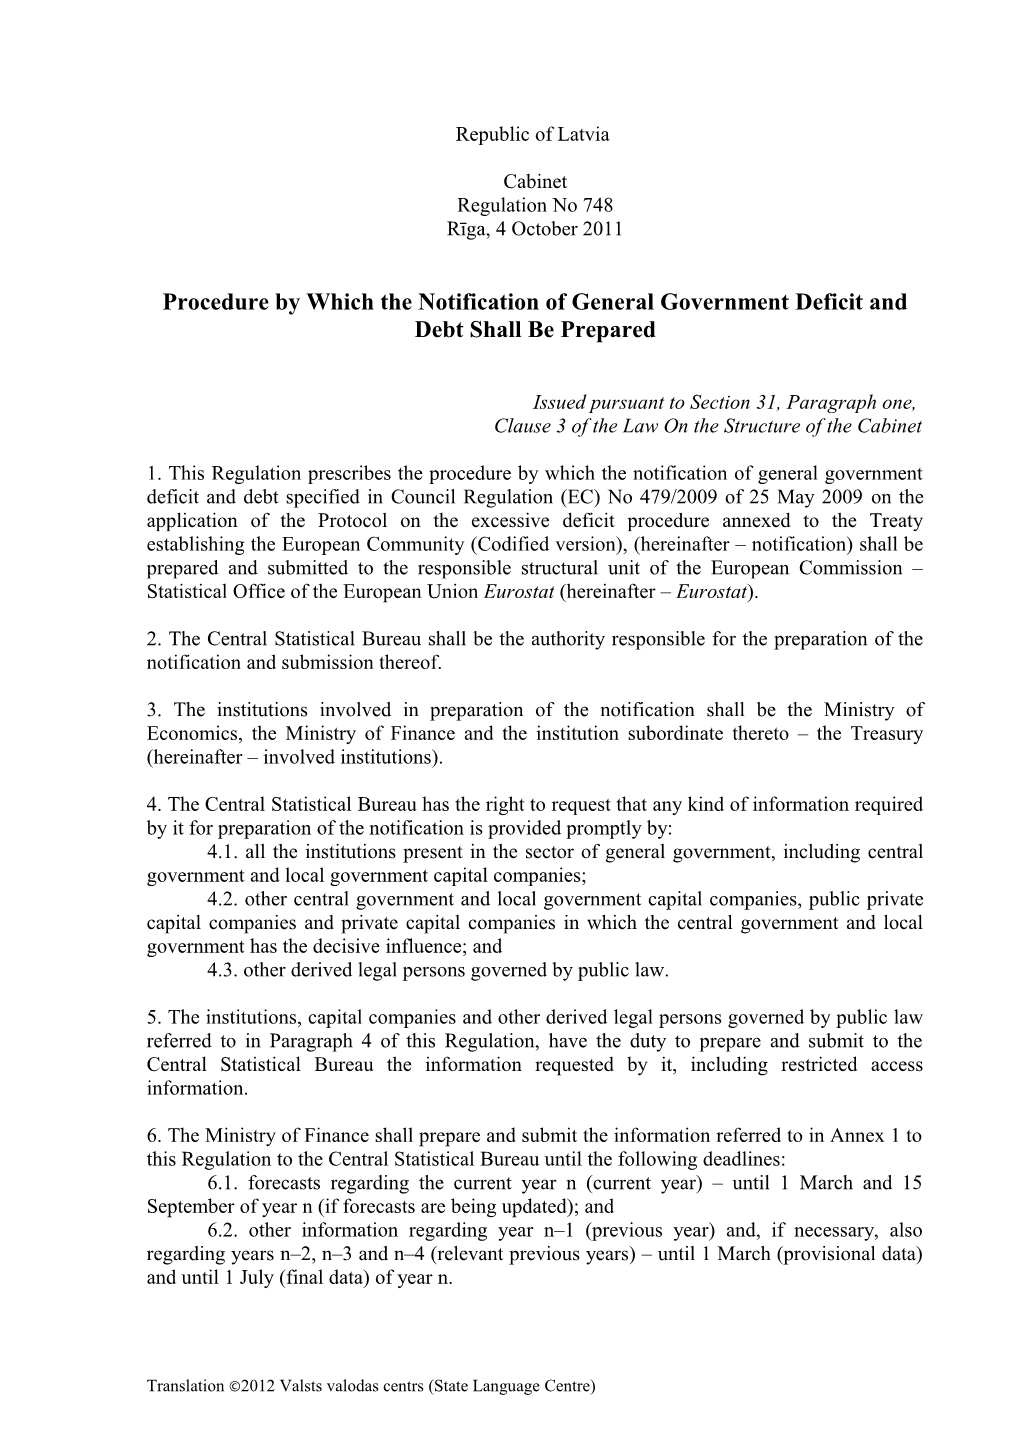 Procedure by Which the Notification of General Government Deficit and Debt Shall Be Prepared